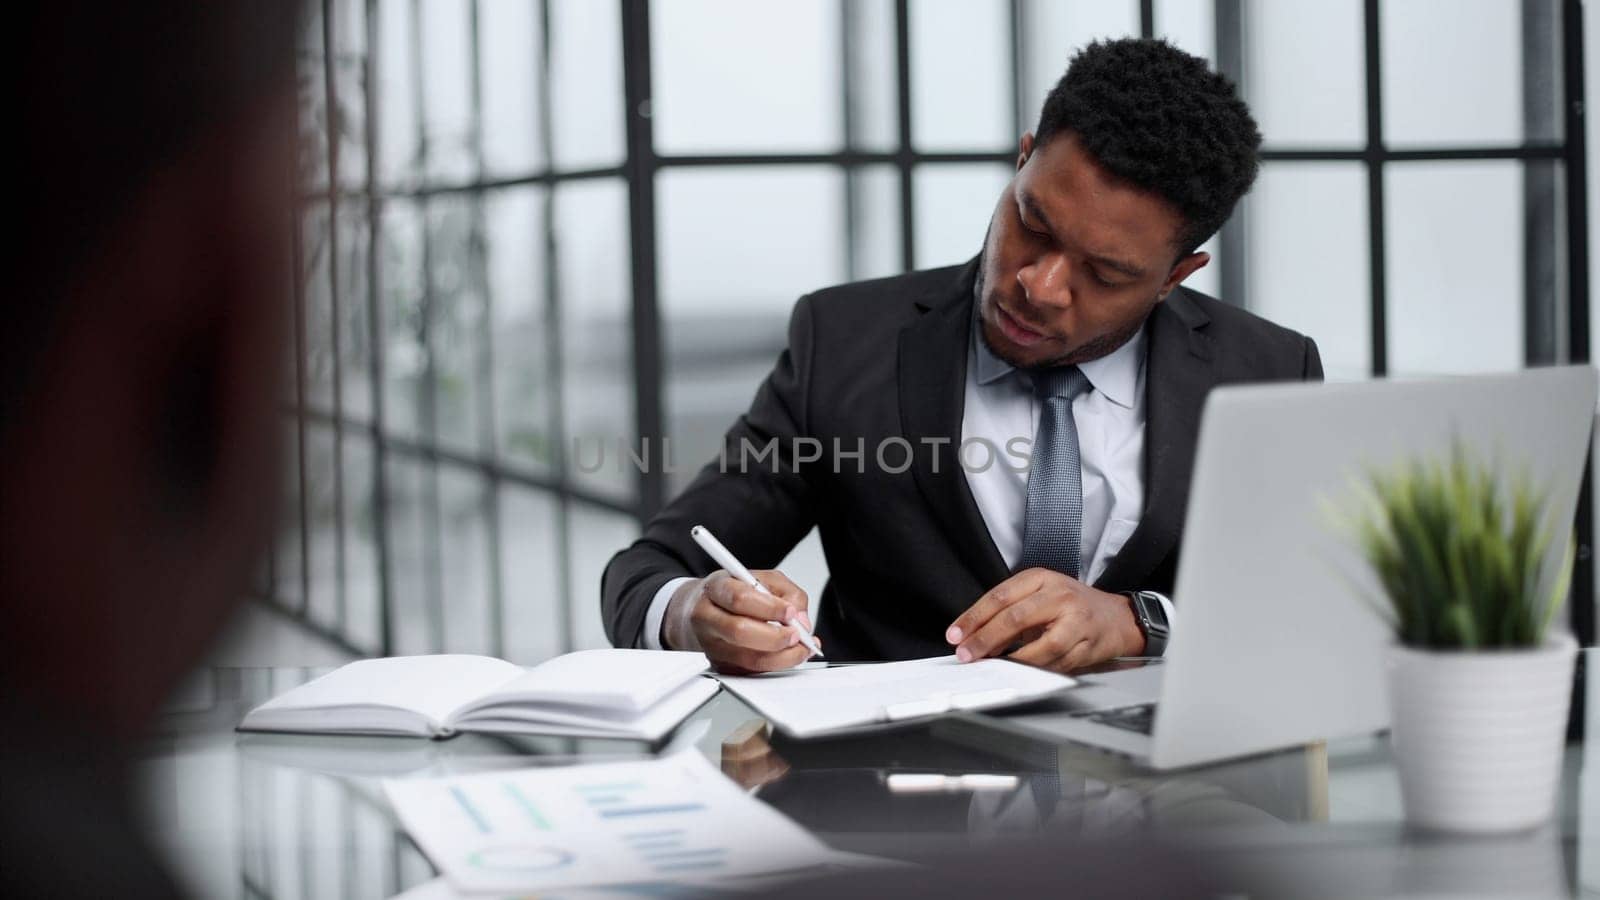 Focused young businessman signing agreement with skilled lawyer